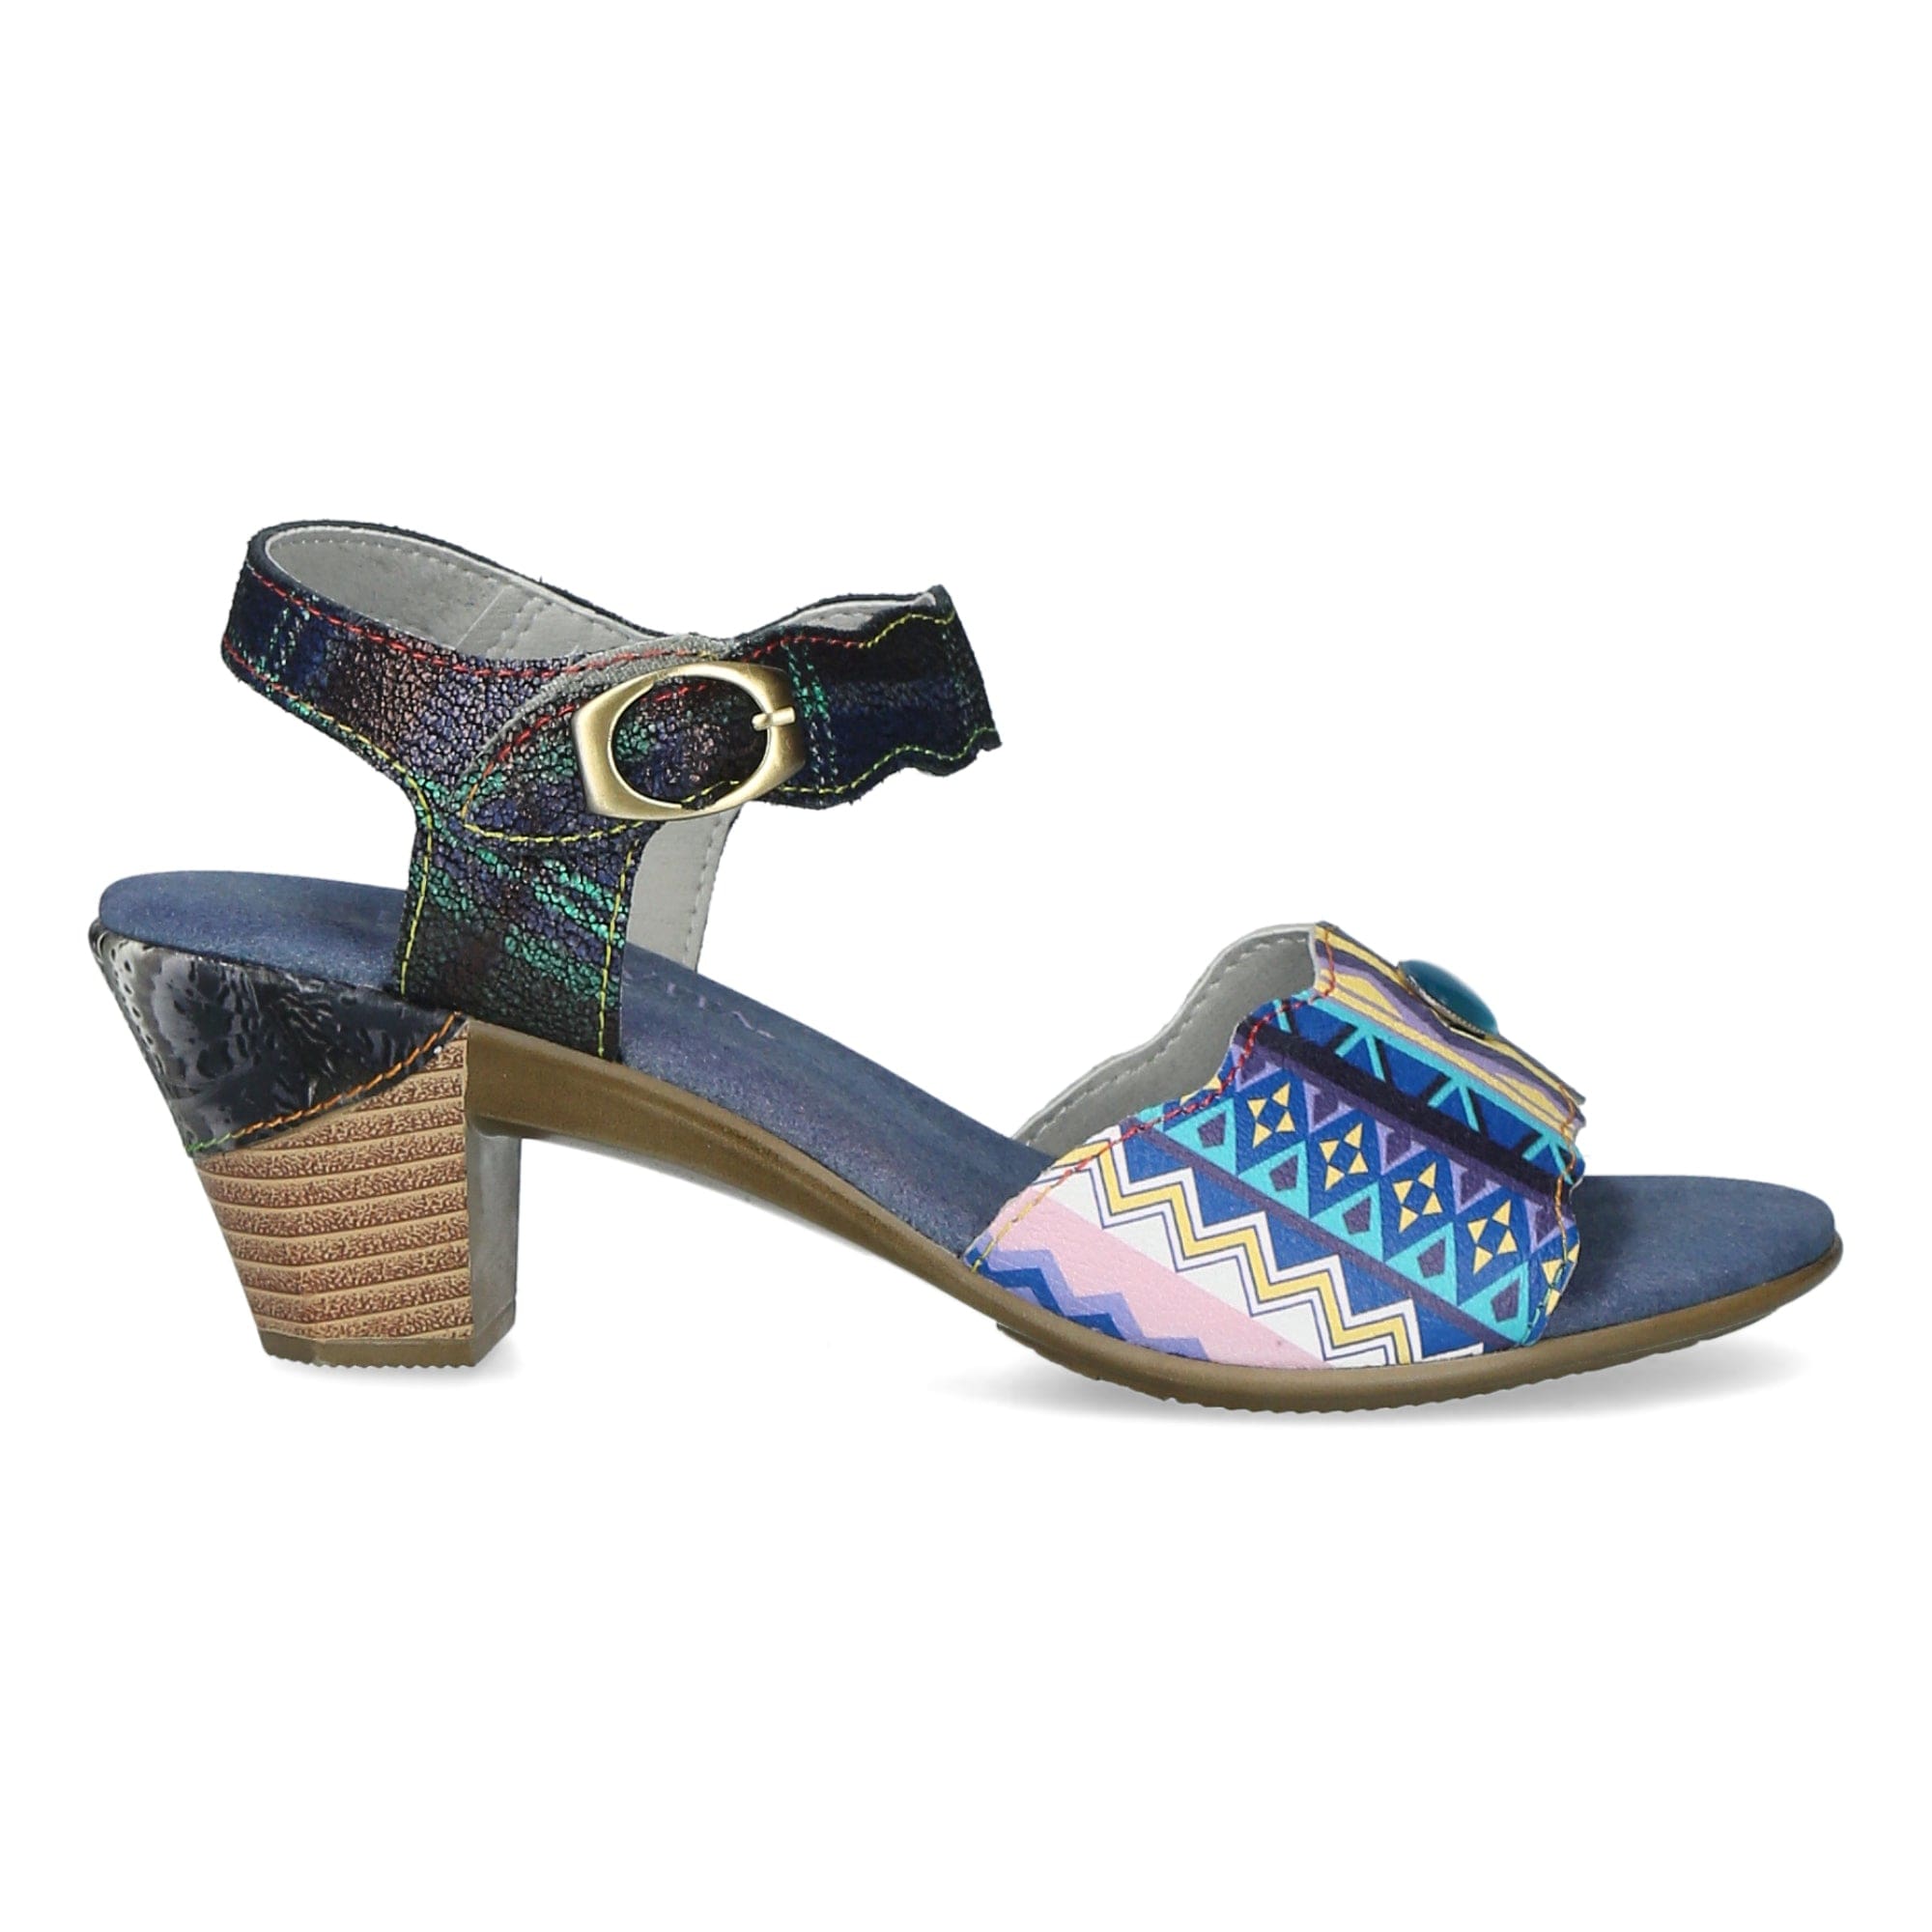 Shoes SL3063-2A - 35 / Blue and Yellow Multi - Sandal